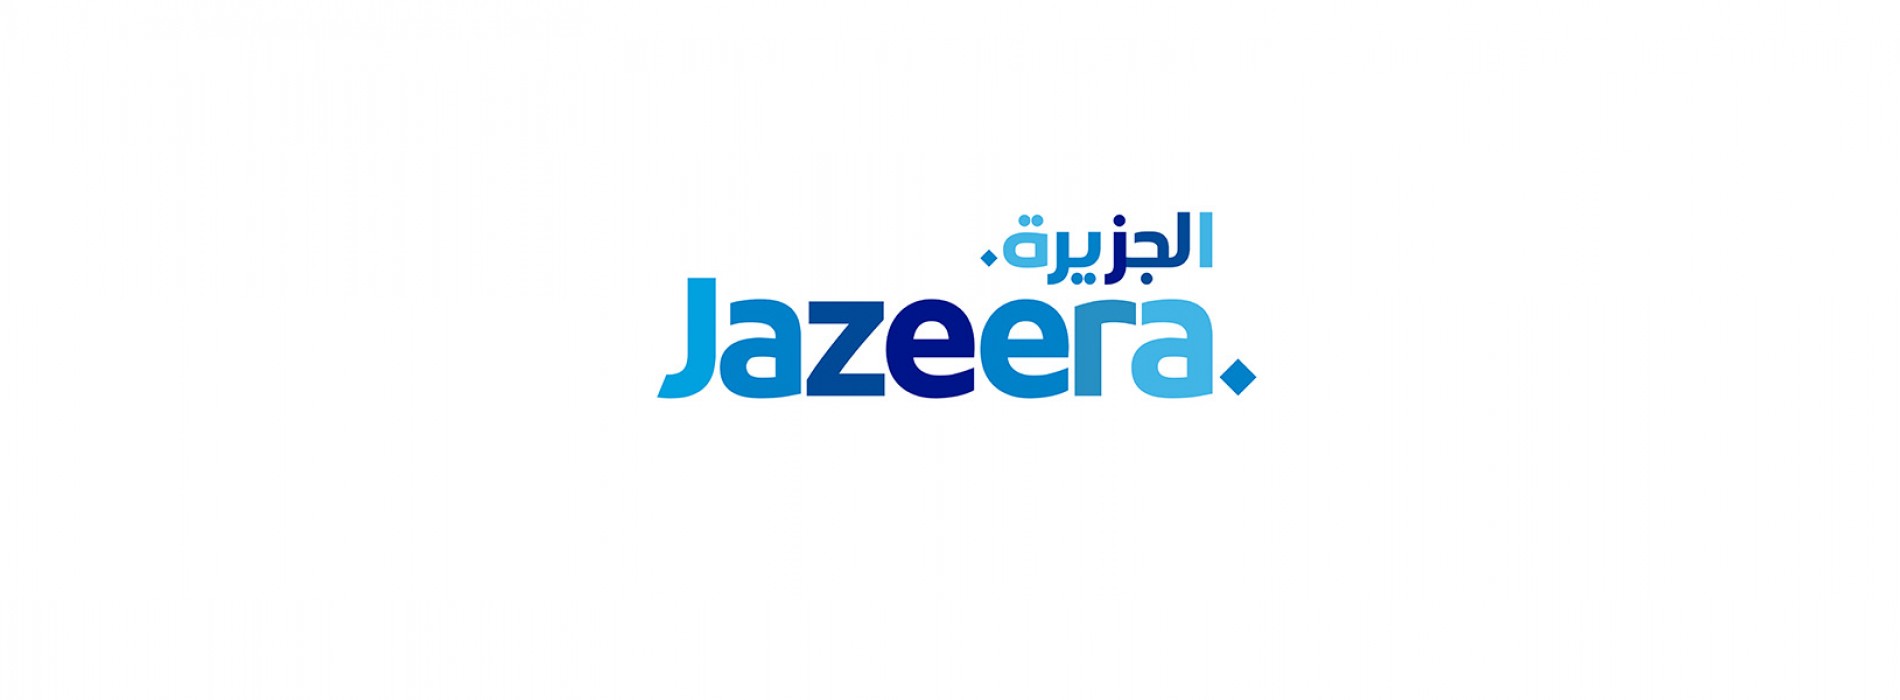 Jazeera Airways returns to profitability in record time in 2021 with KD7.1 million